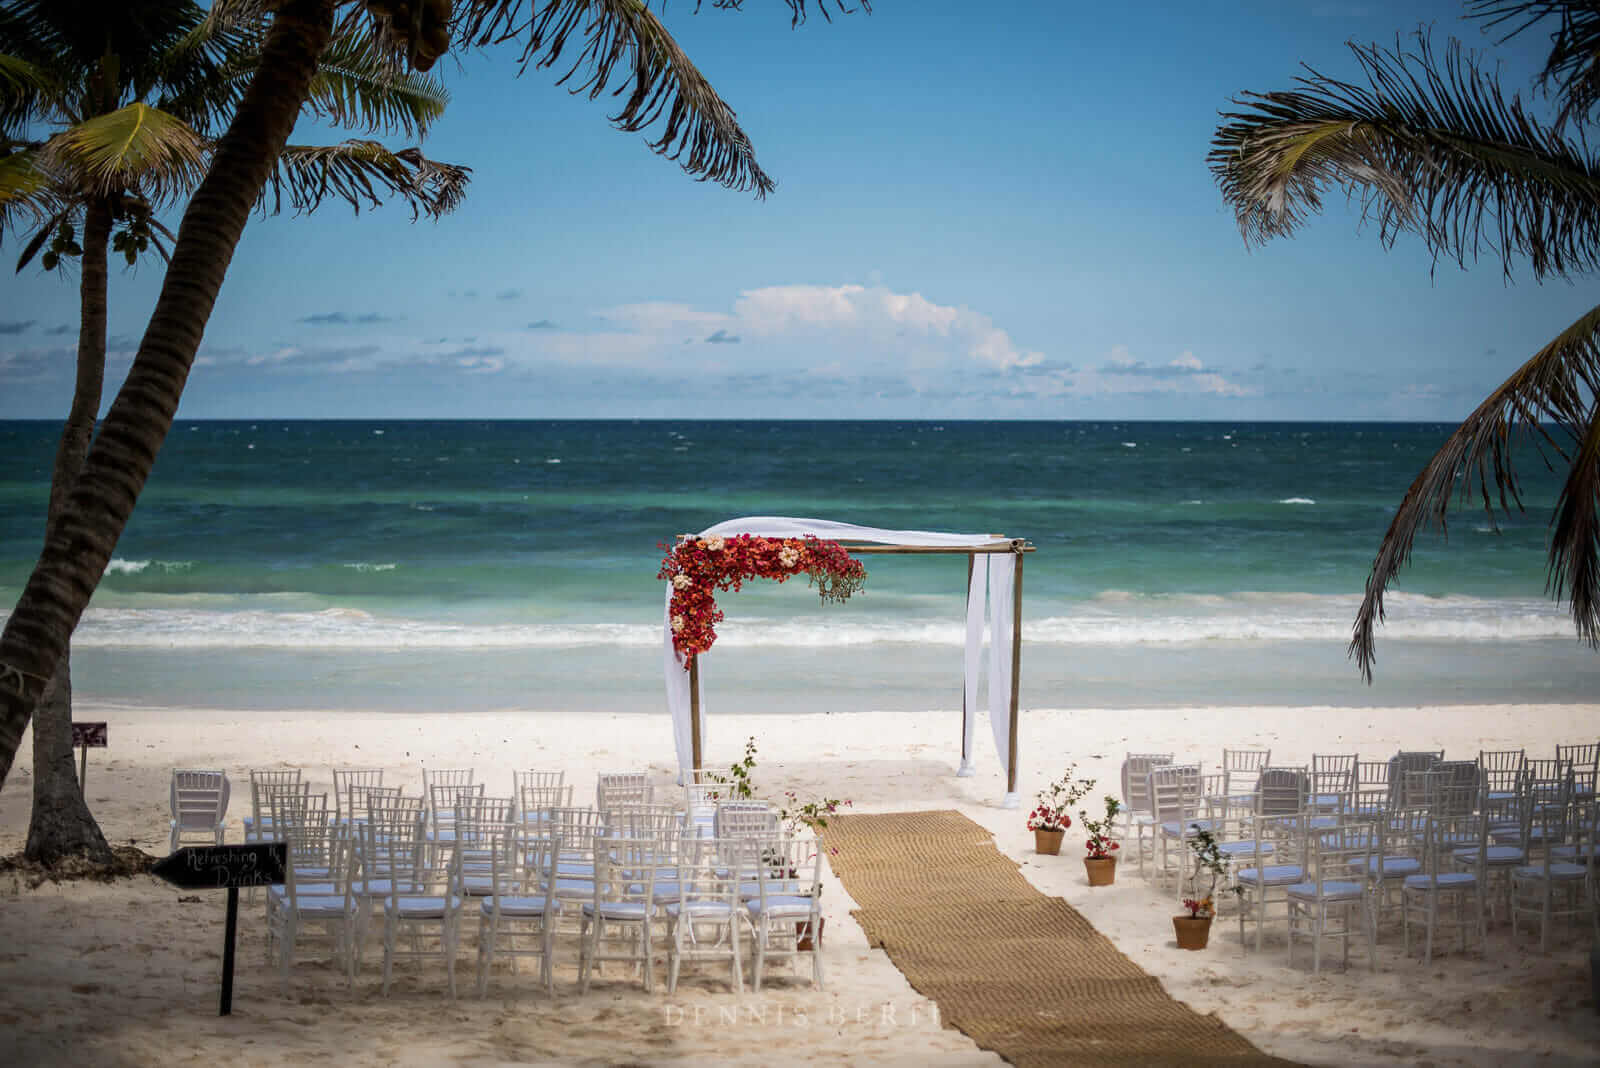 Seaside serenity: the elegance and uniqueness of beach weddings in Tulum